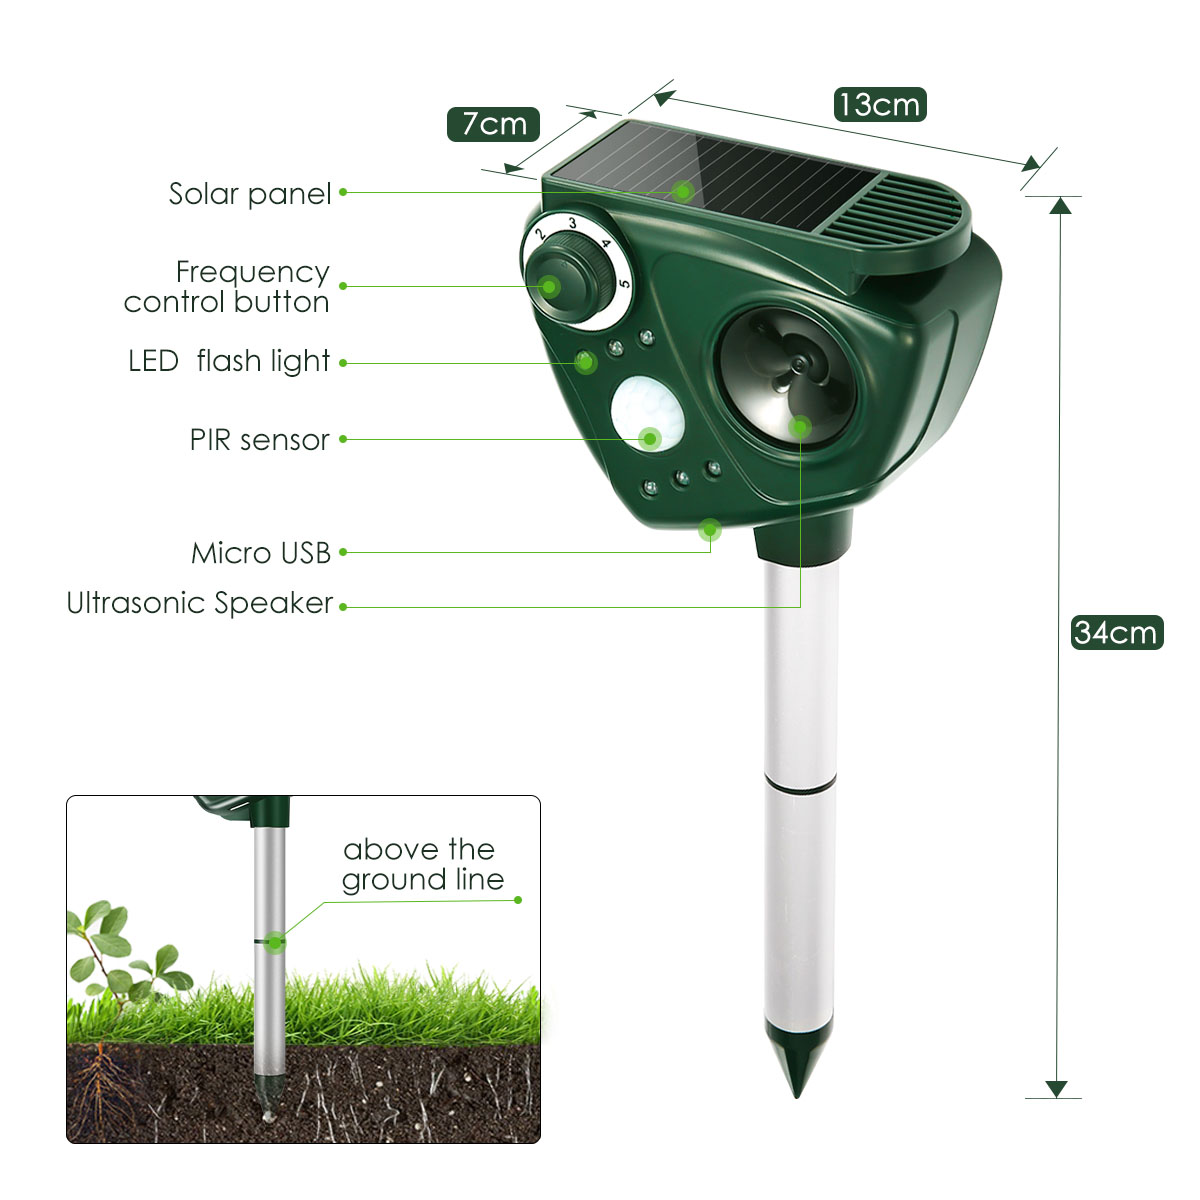 Solar-Powered-Ultrasonic-Pest-Animal-Repeller-Motion-Bird-Repellent-Control-Scare-Waterproof-with-6--1706452-6